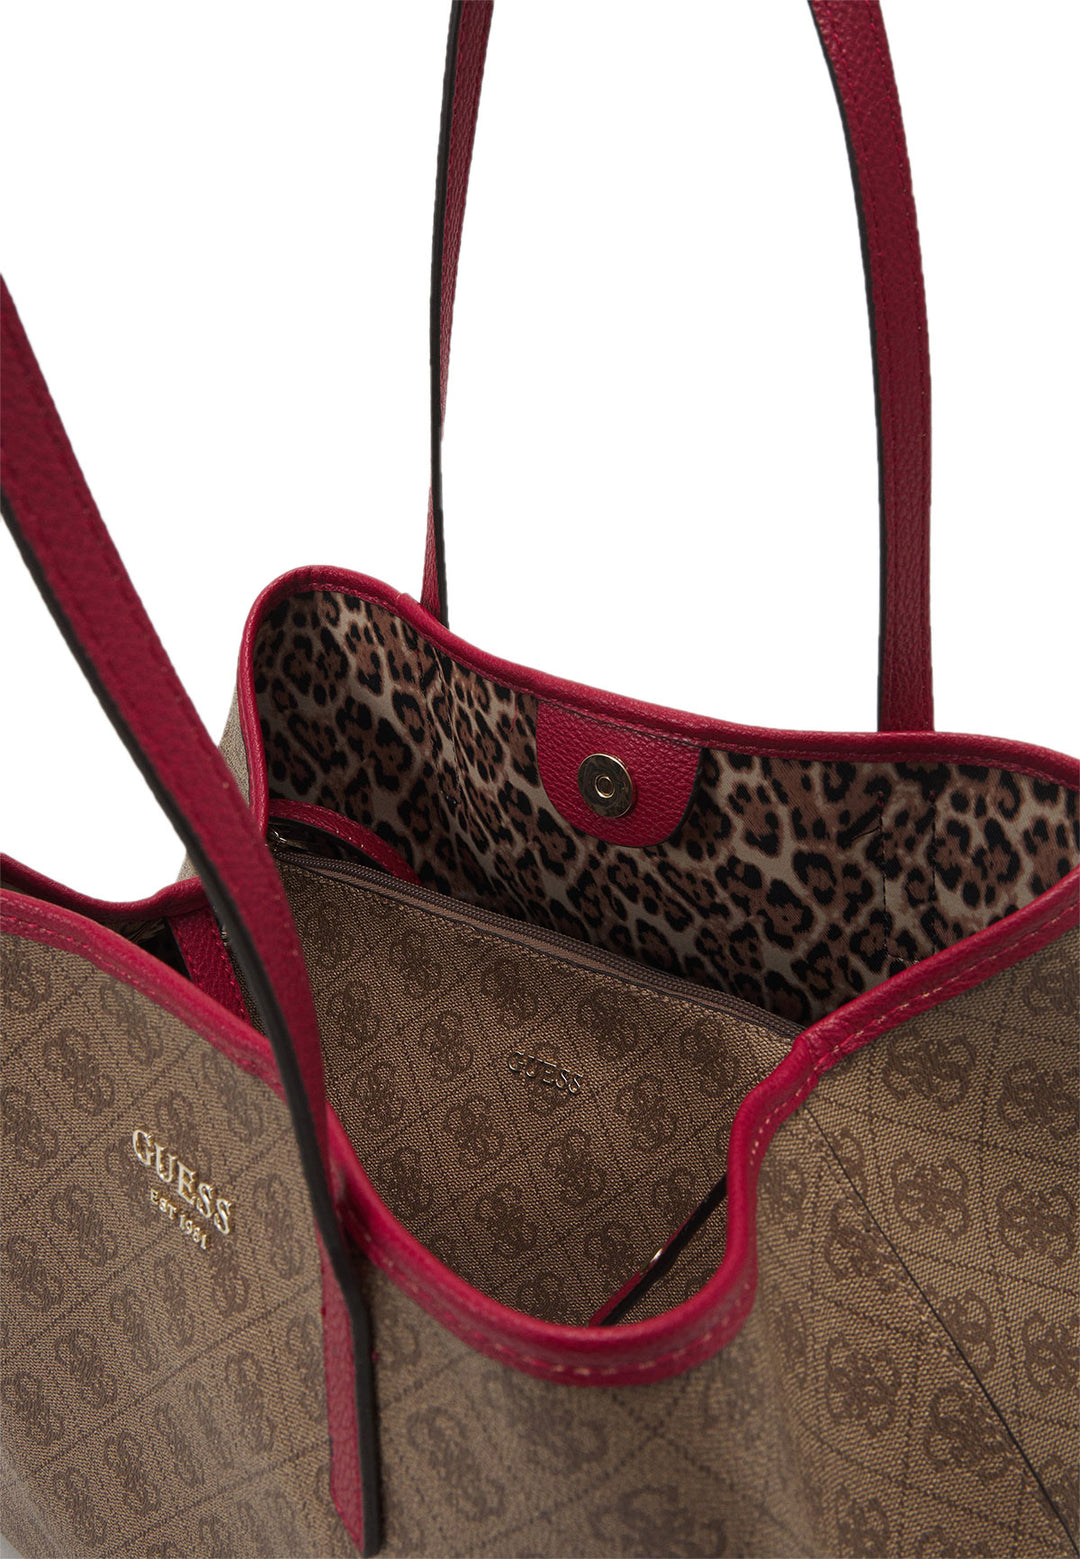 Guess Vikky Tote Bag In Brown For Women